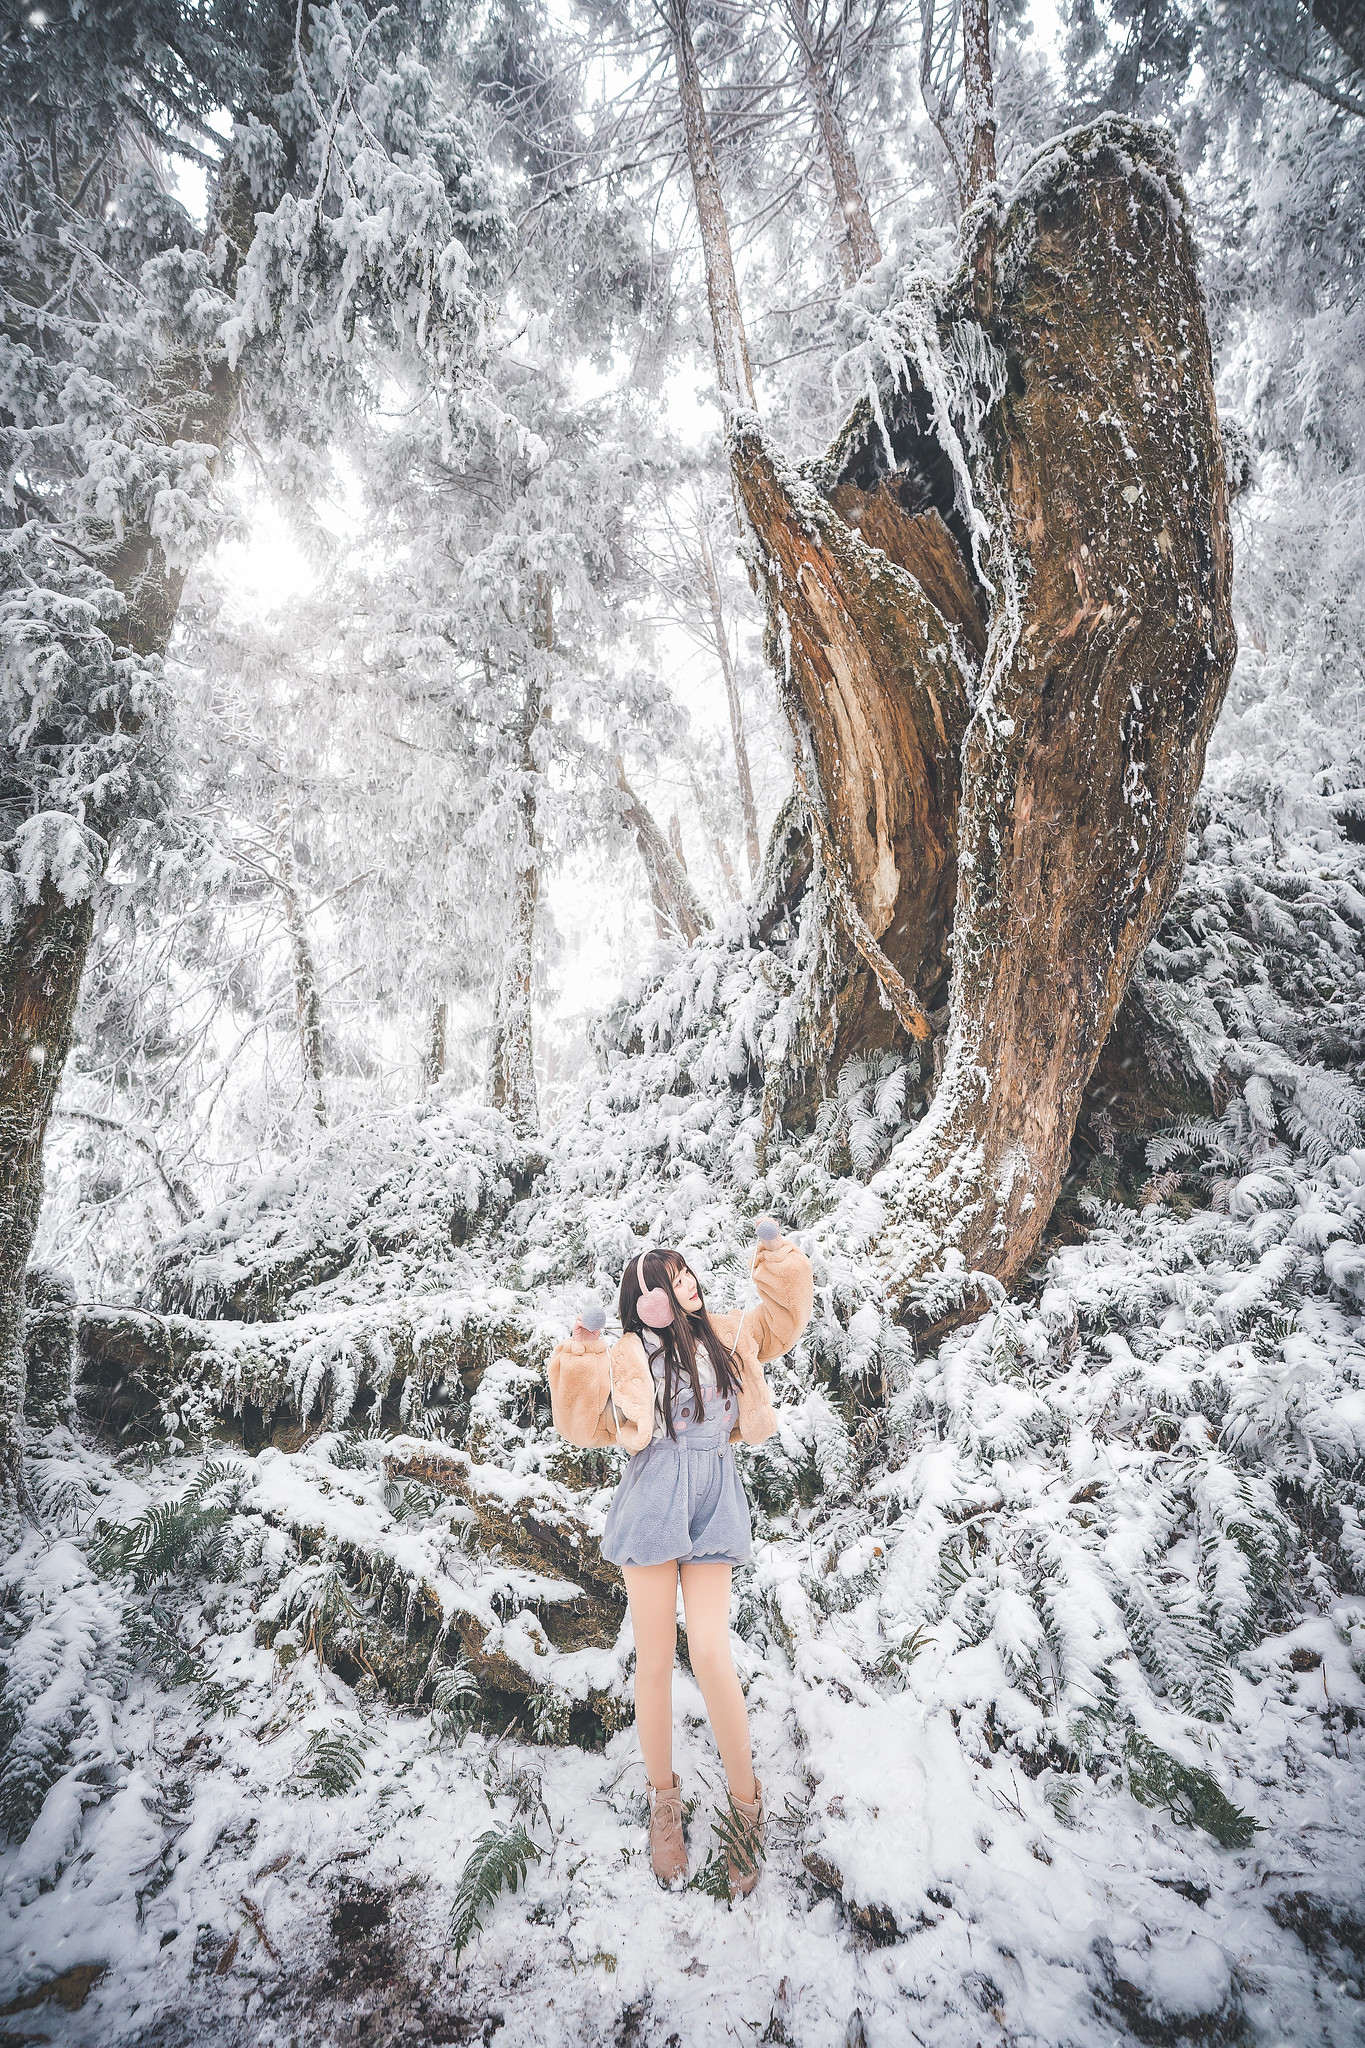 Asian Women Model Outdoors Women Outdoors Trees Asia Plants Cold Winter Snow Standing 1365x2048